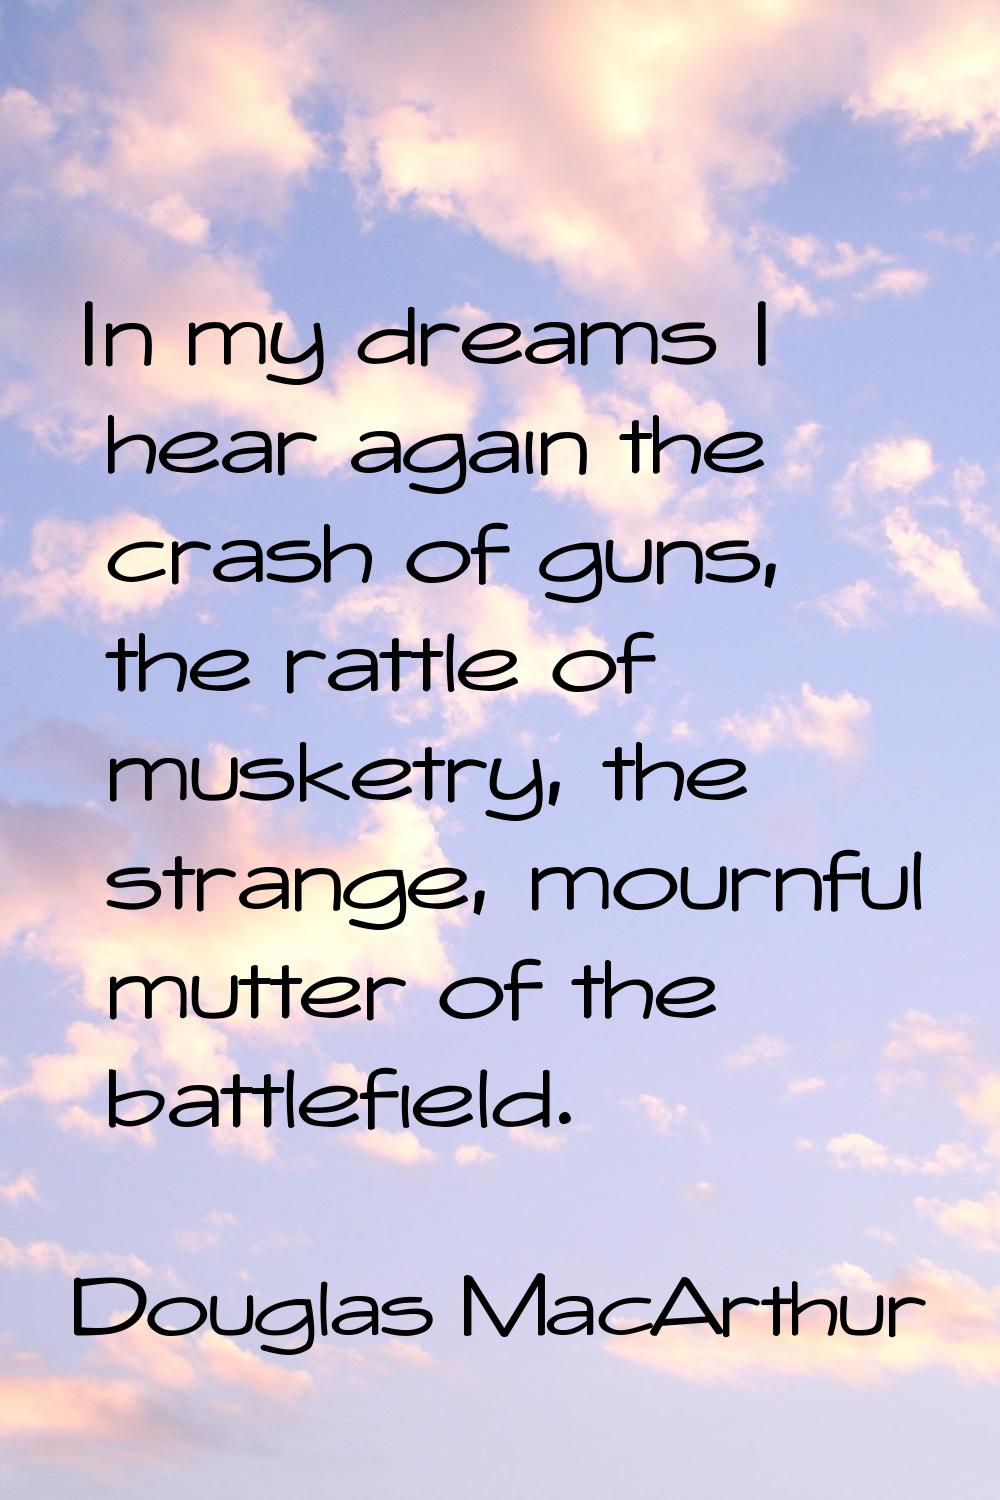 In my dreams I hear again the crash of guns, the rattle of musketry, the strange, mournful mutter o